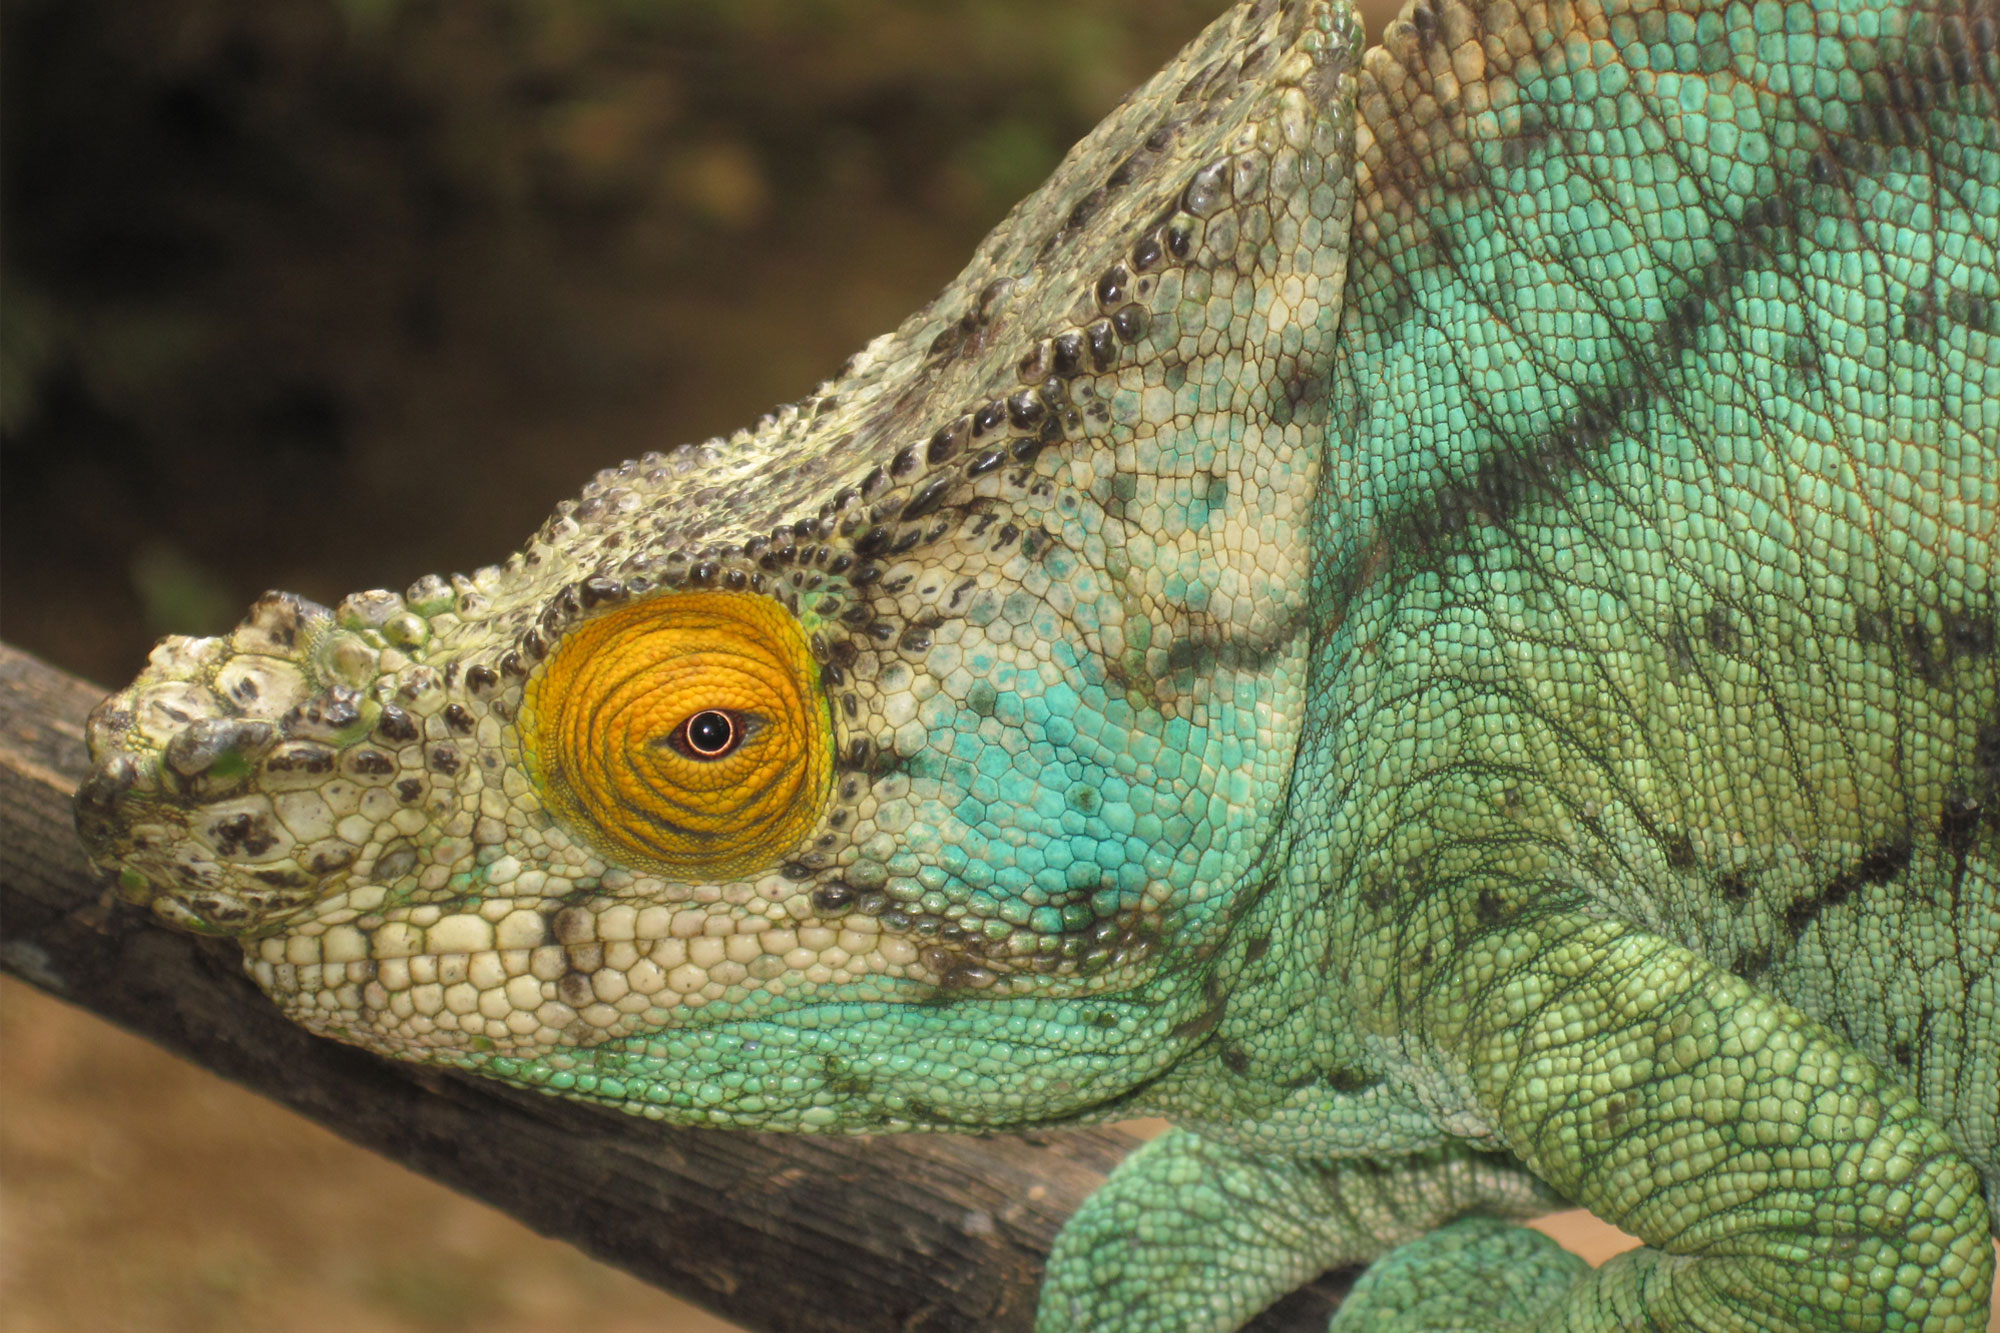 Scaly reptile reclining on a branch